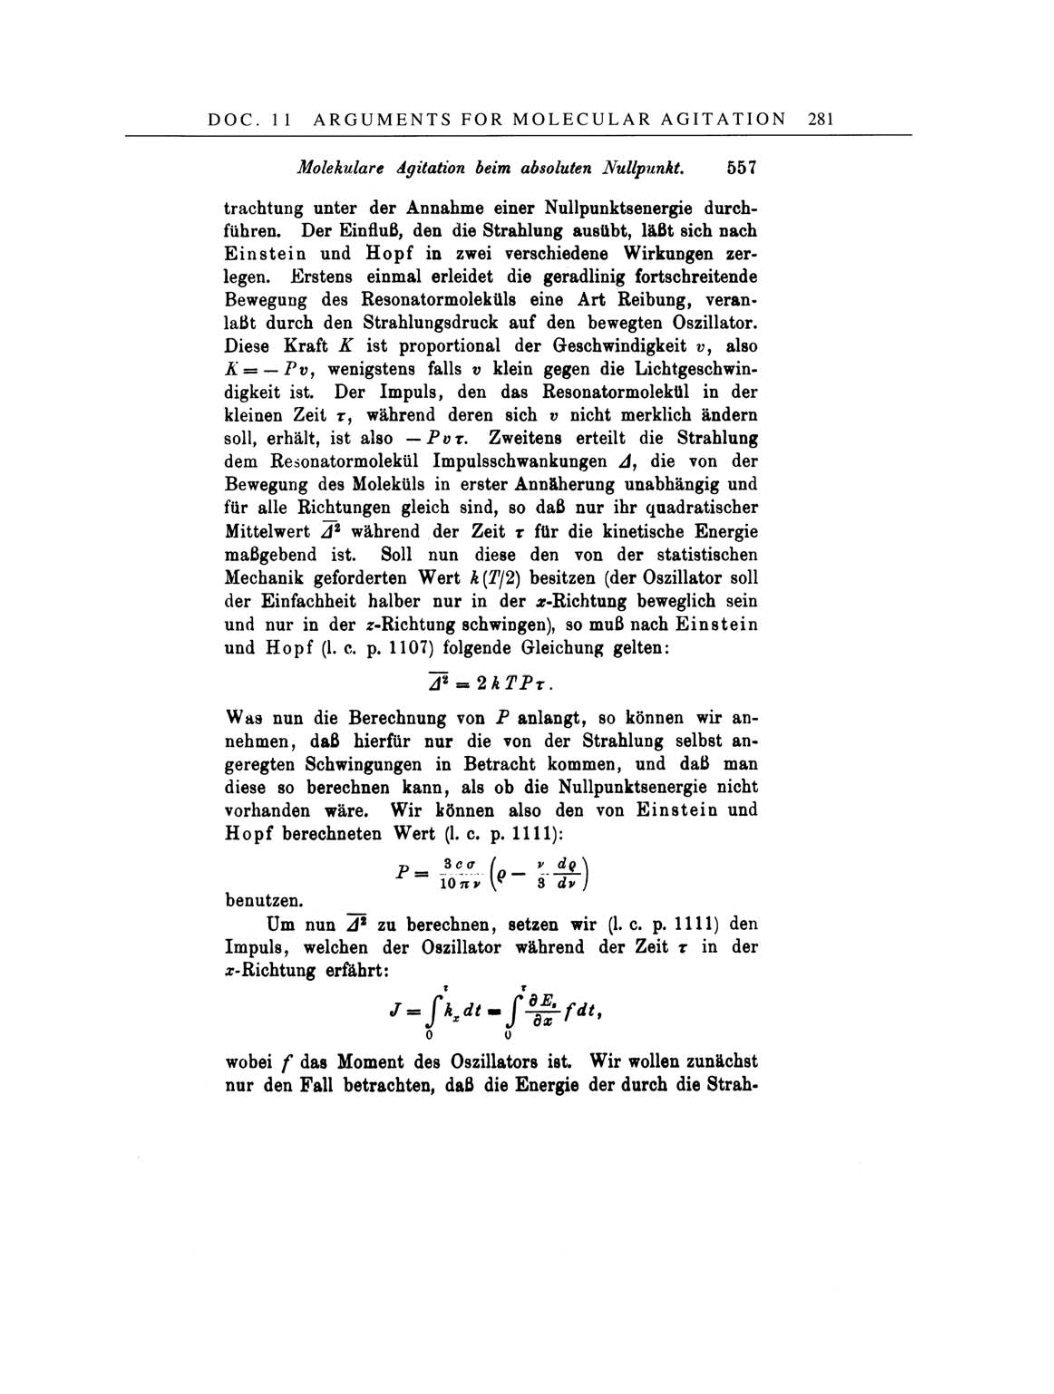 Volume 4: The Swiss Years: Writings 1912-1914 page 281